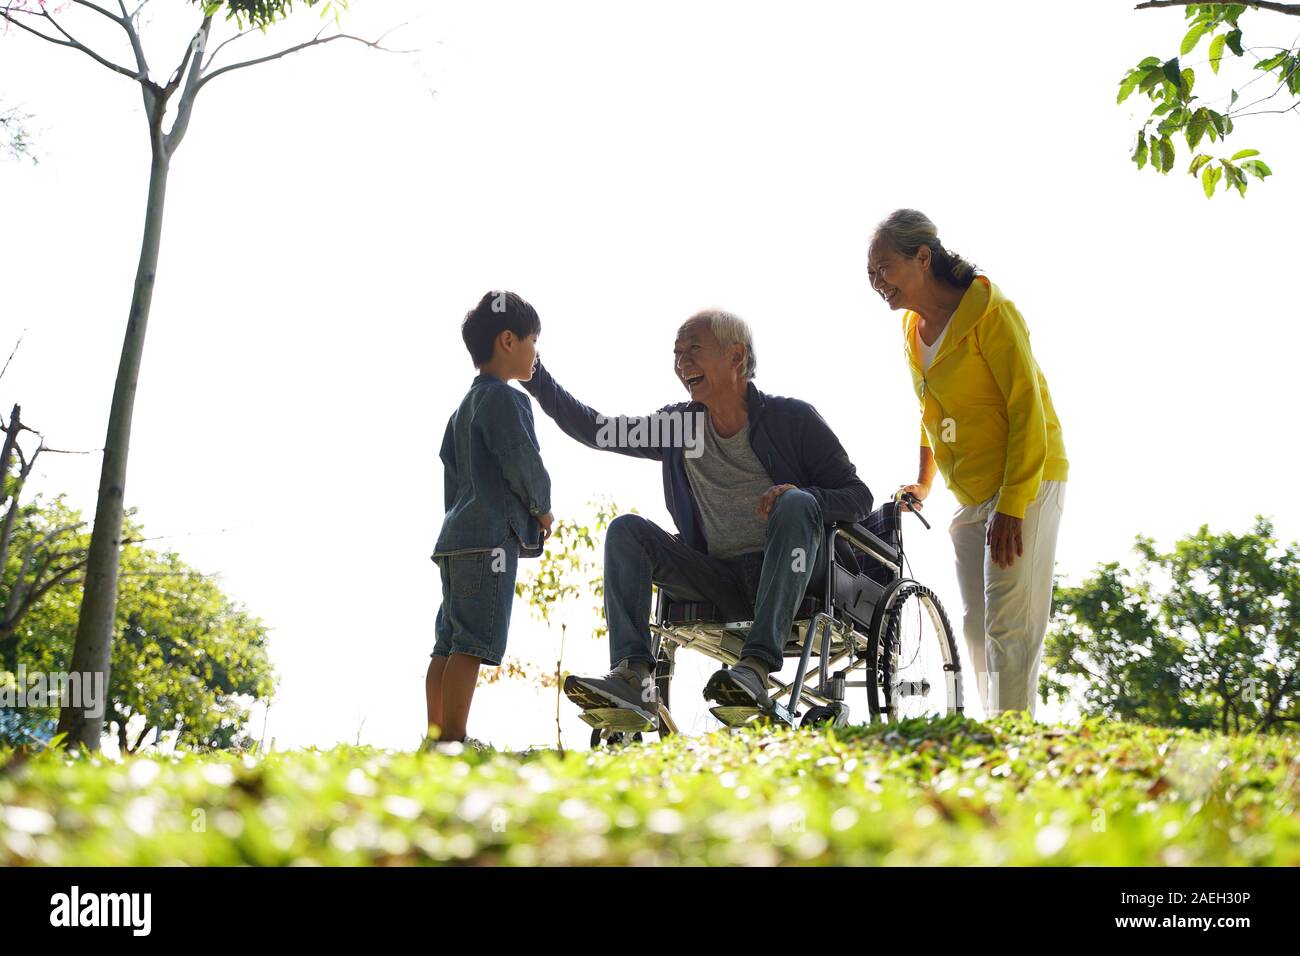 asian grandfather grandmother and grandson having fun outdoors in park Stock Photo